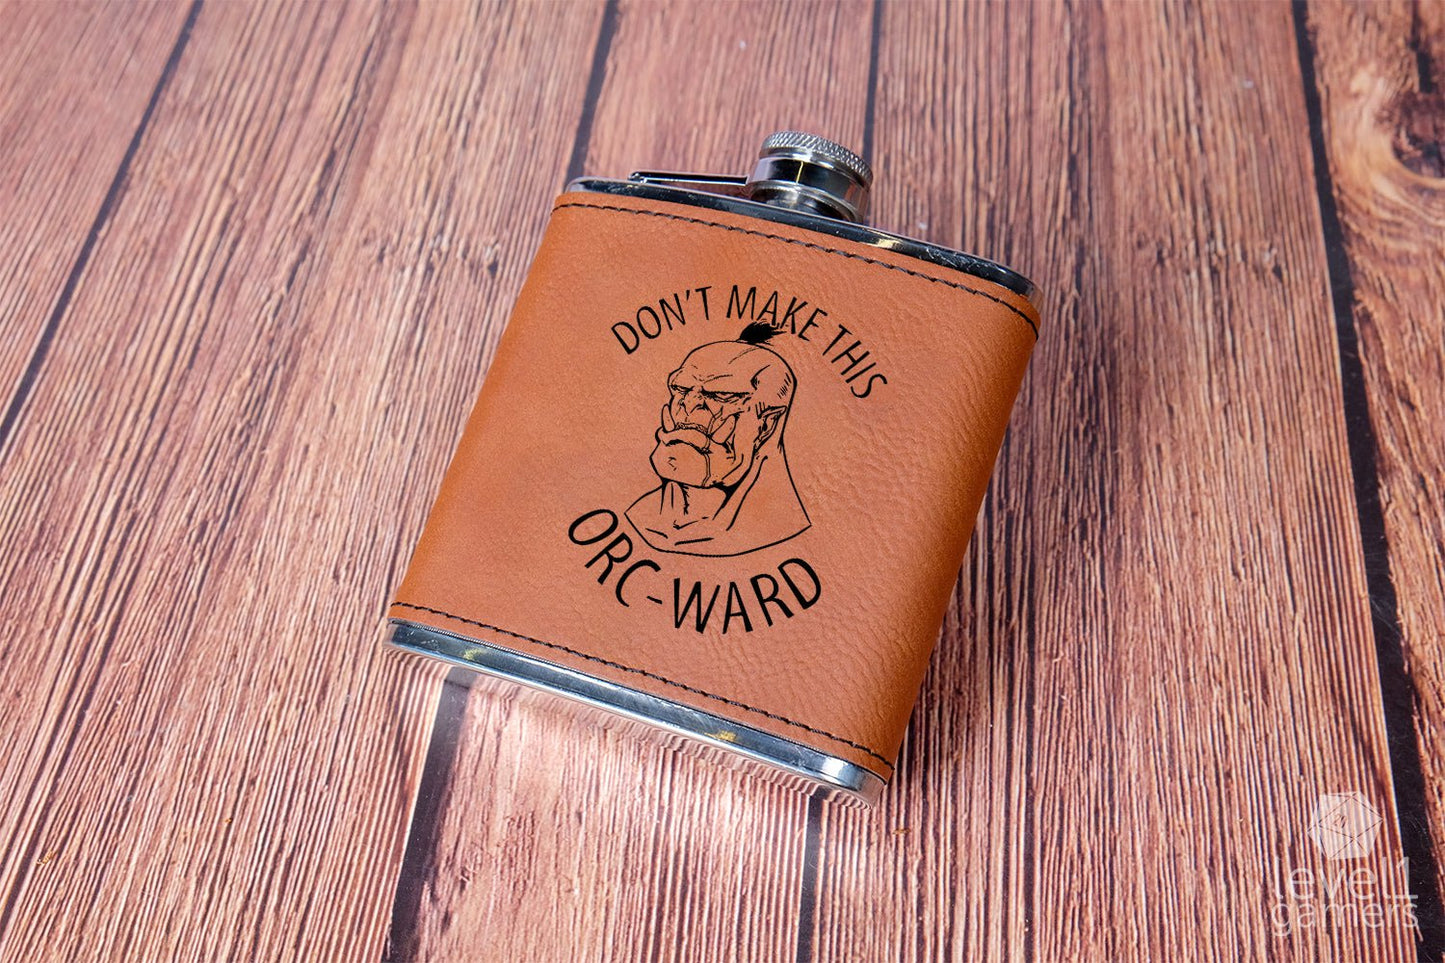 Orc-Ward Flask  Level 1 Gamers   